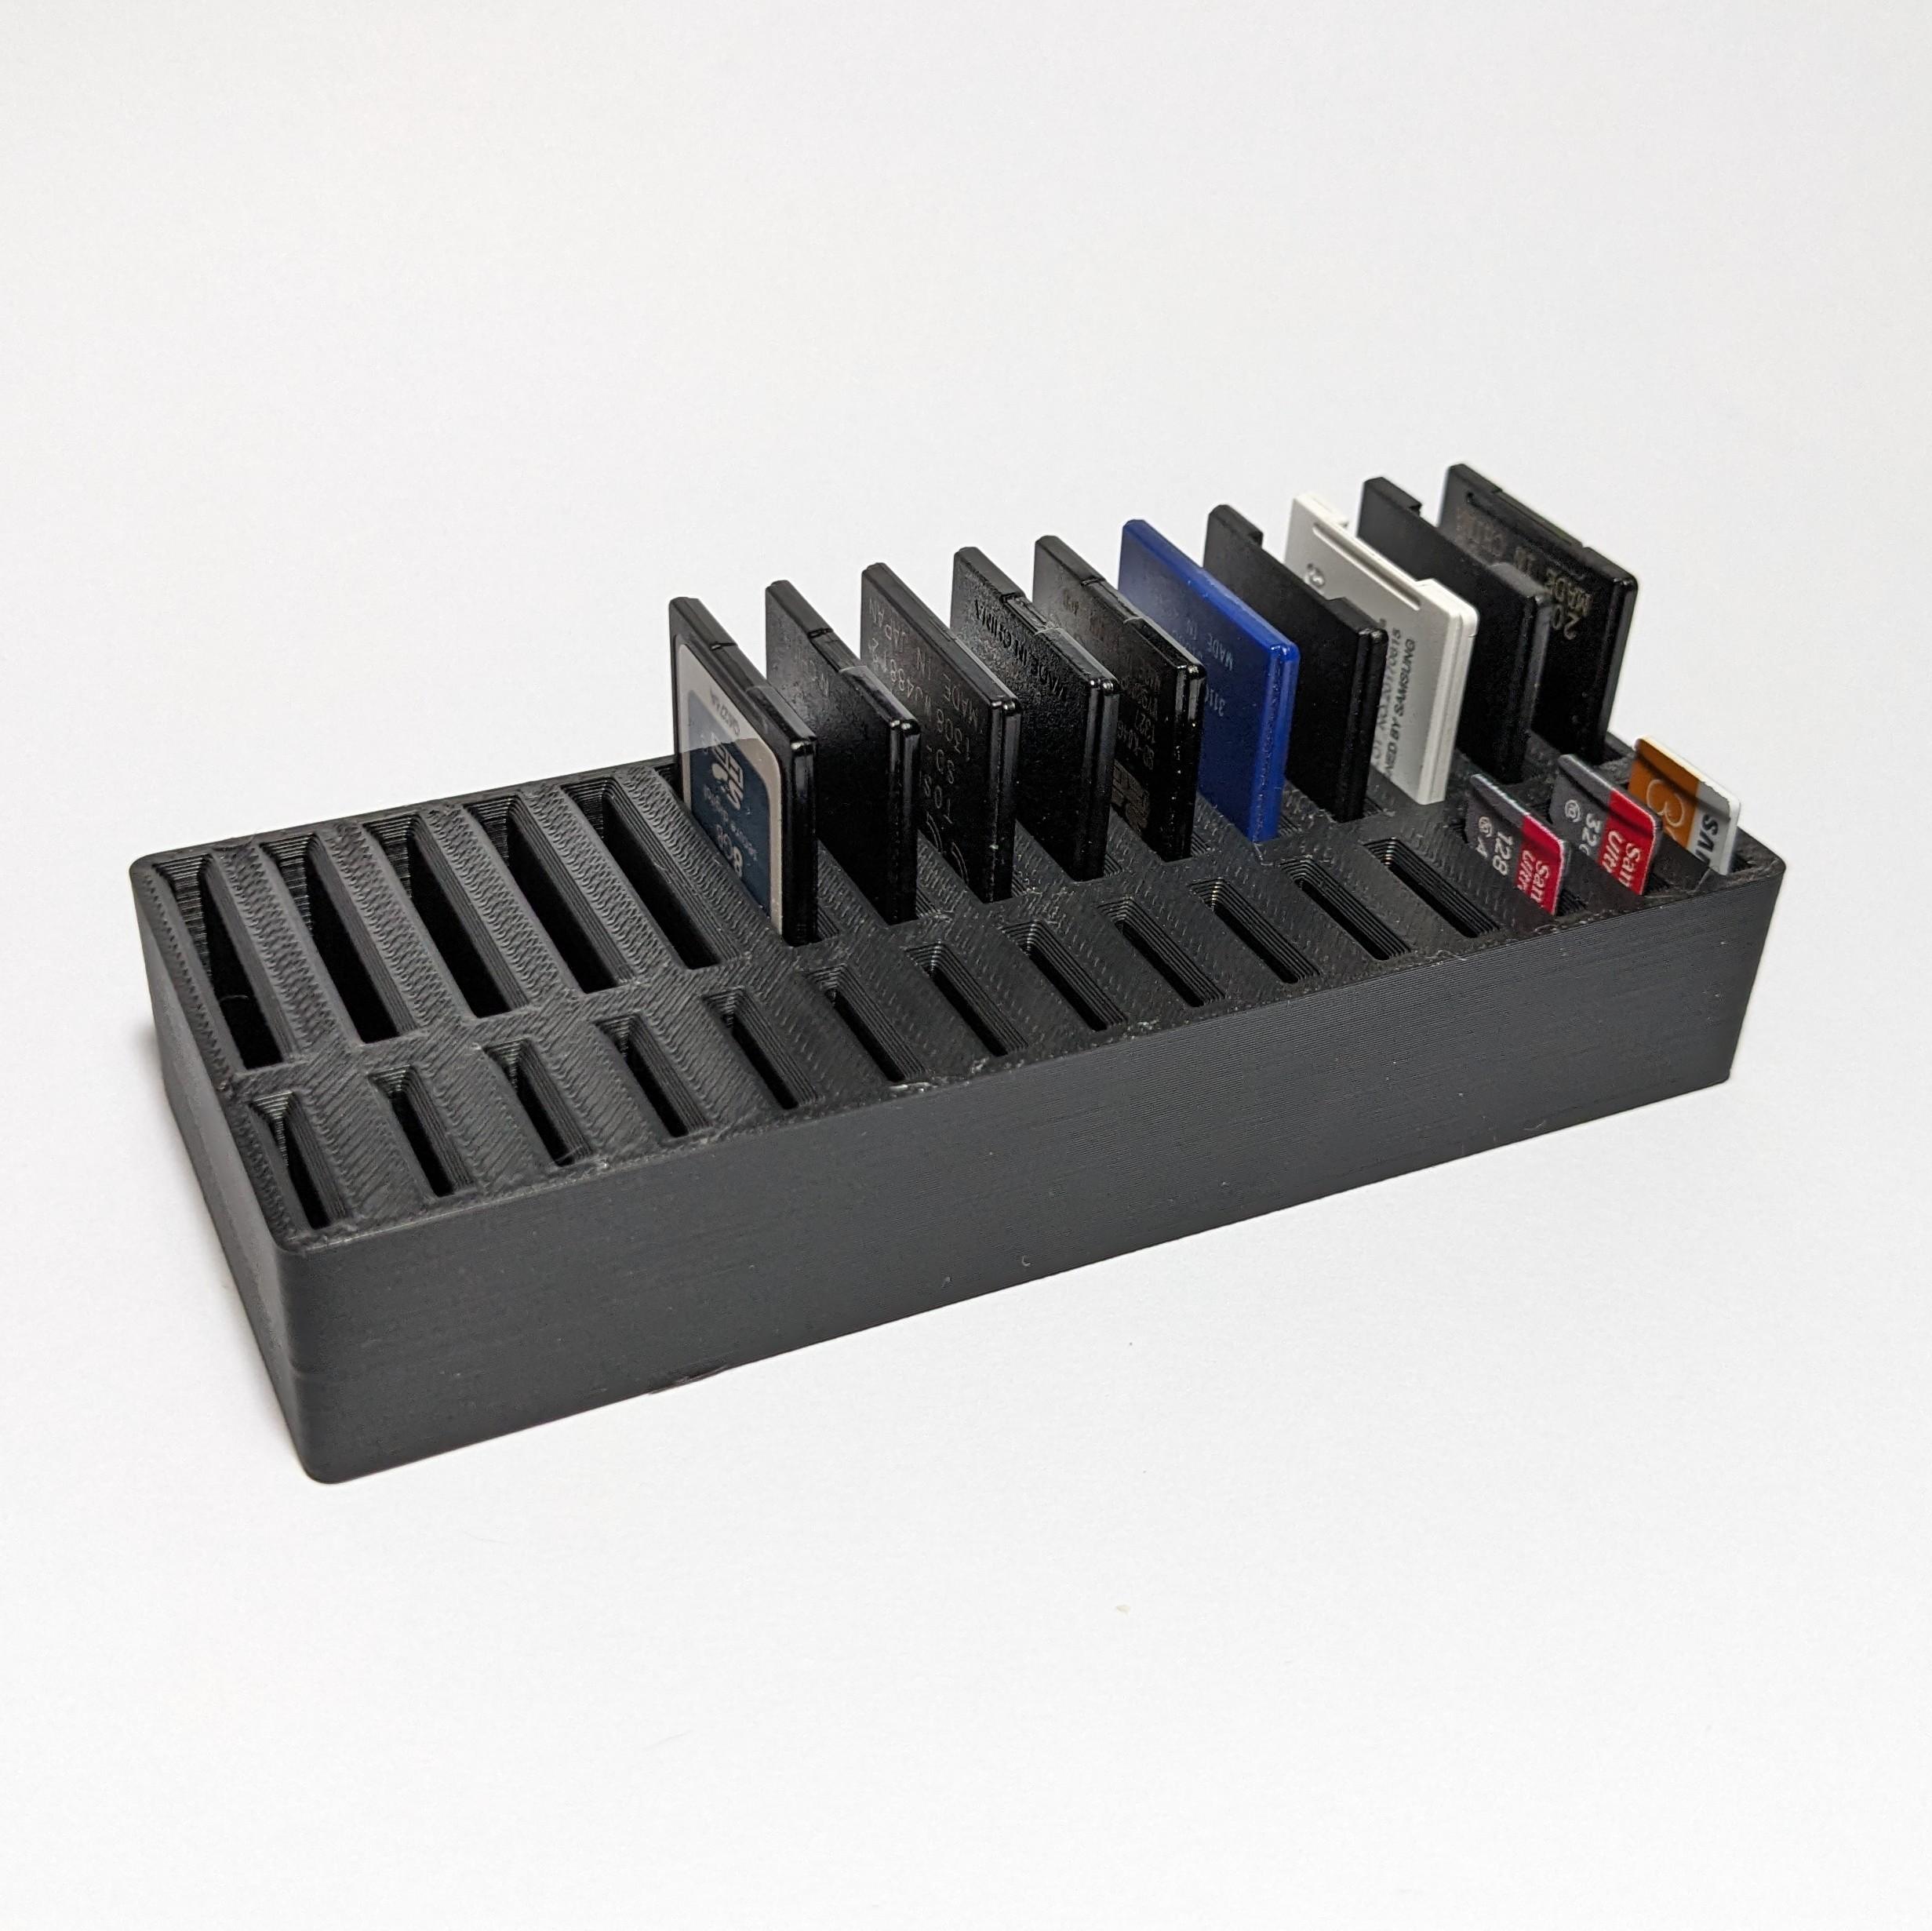 SD and micro SD card holder collection 3d model